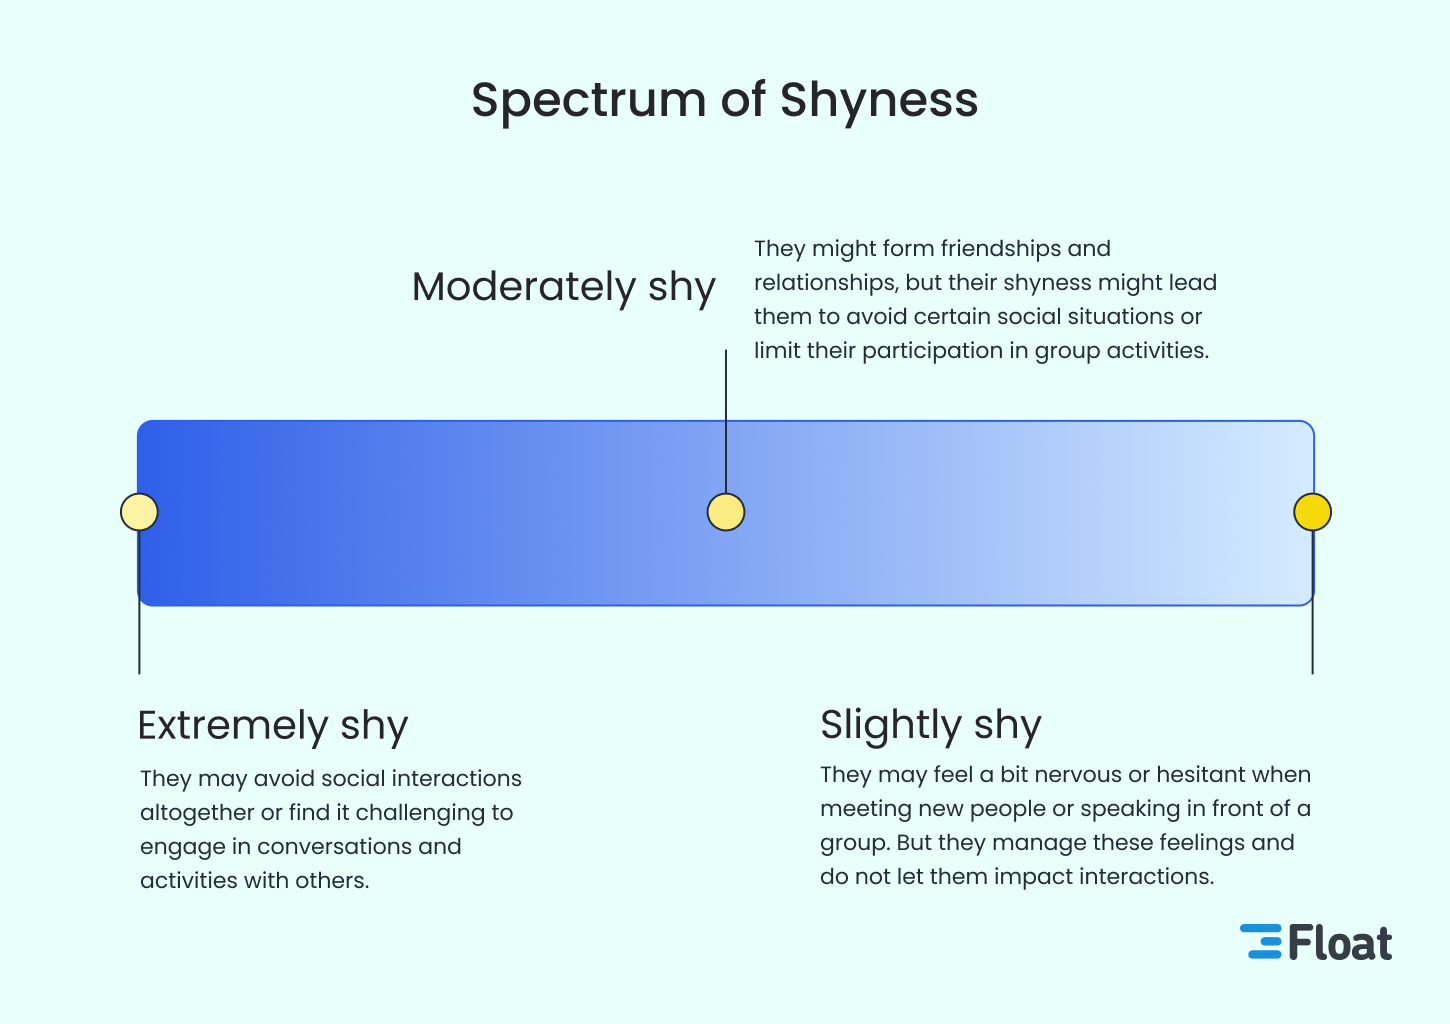 A spectrum showing the range of shyness from extremely shy to moderately shy to slightly shy.